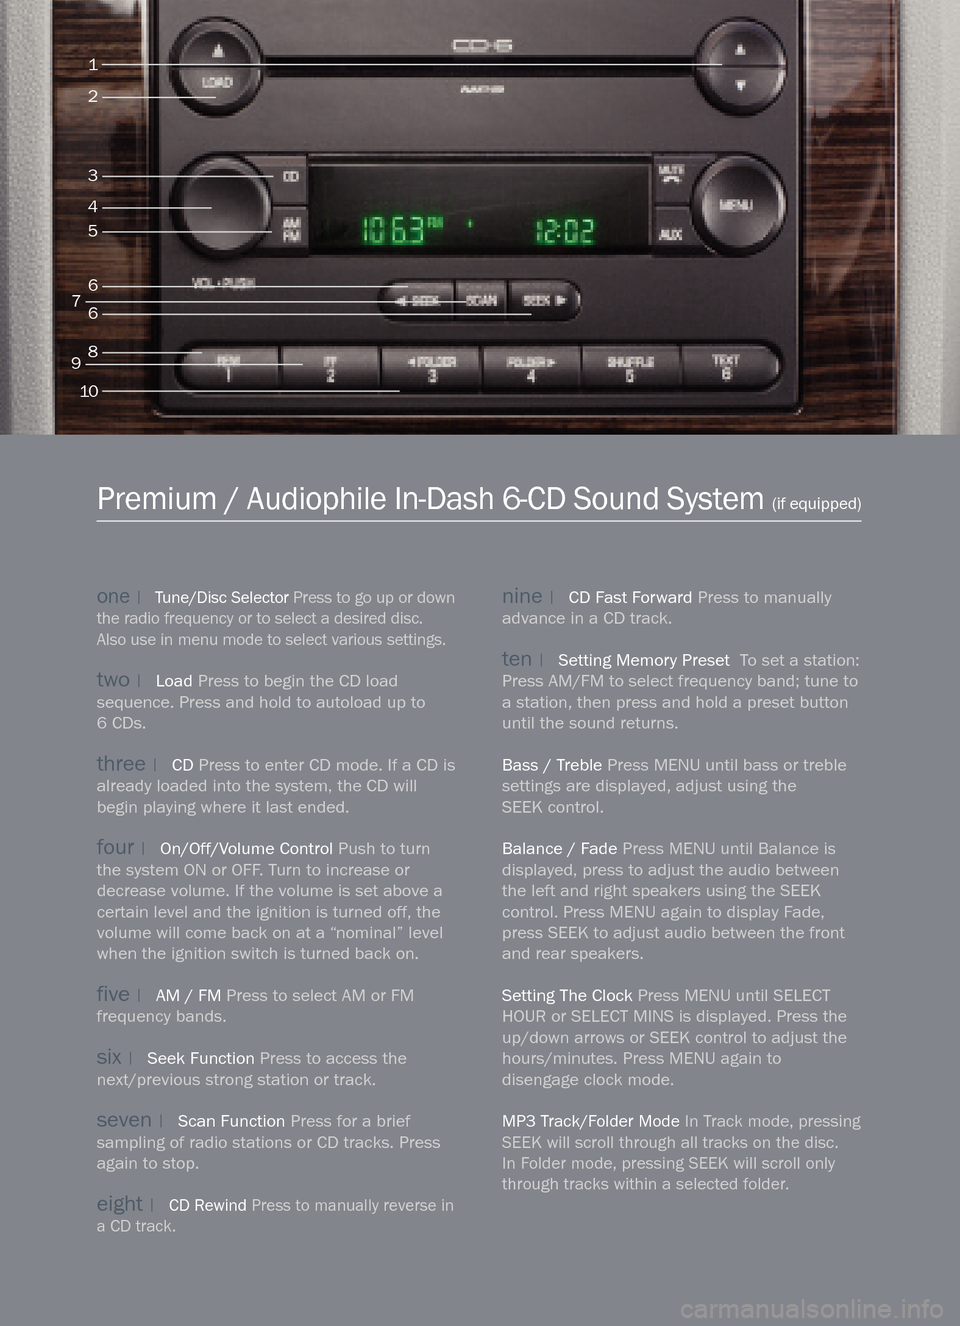 Mercury Montego 2005  Quick Reference Guide one|Tune/Disc SelectorPress to go up or down
the radio frequency or to select a desired disc.Also use in menu mode to select various settings.
two|LoadPress to begin the CD load
sequence. Press and ho